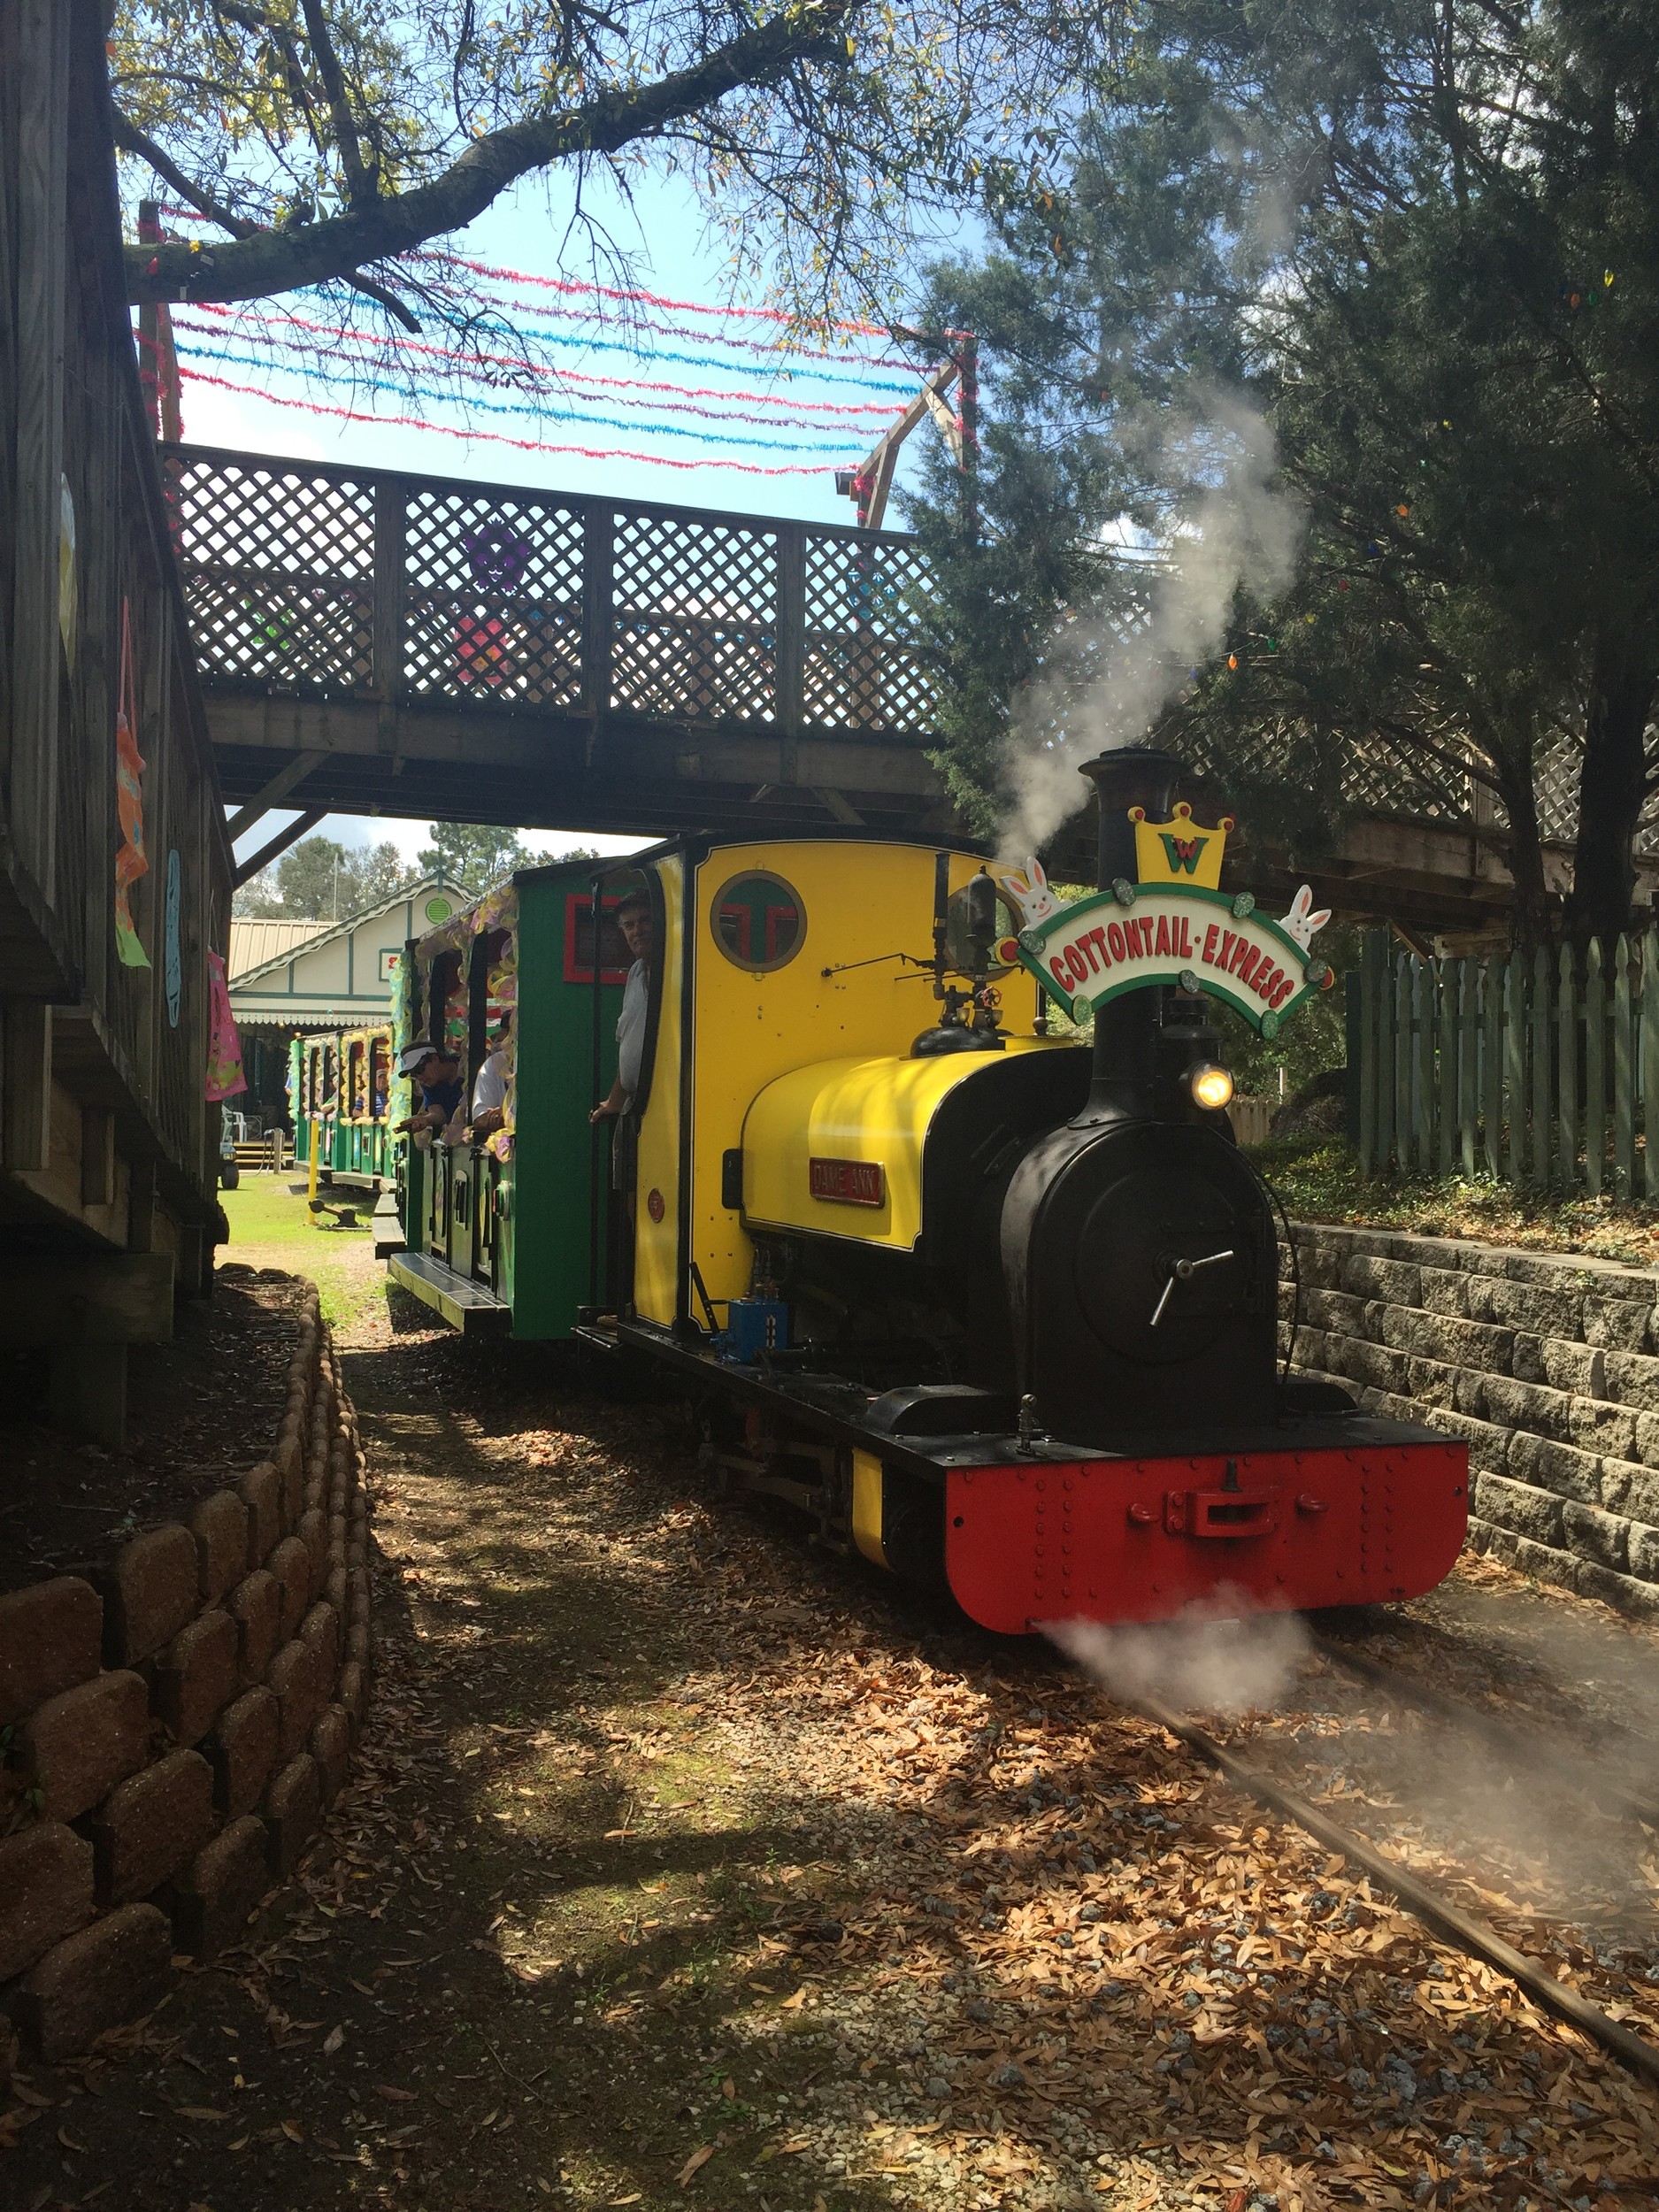 Head to Wales West Light Railway for all your holiday fun.